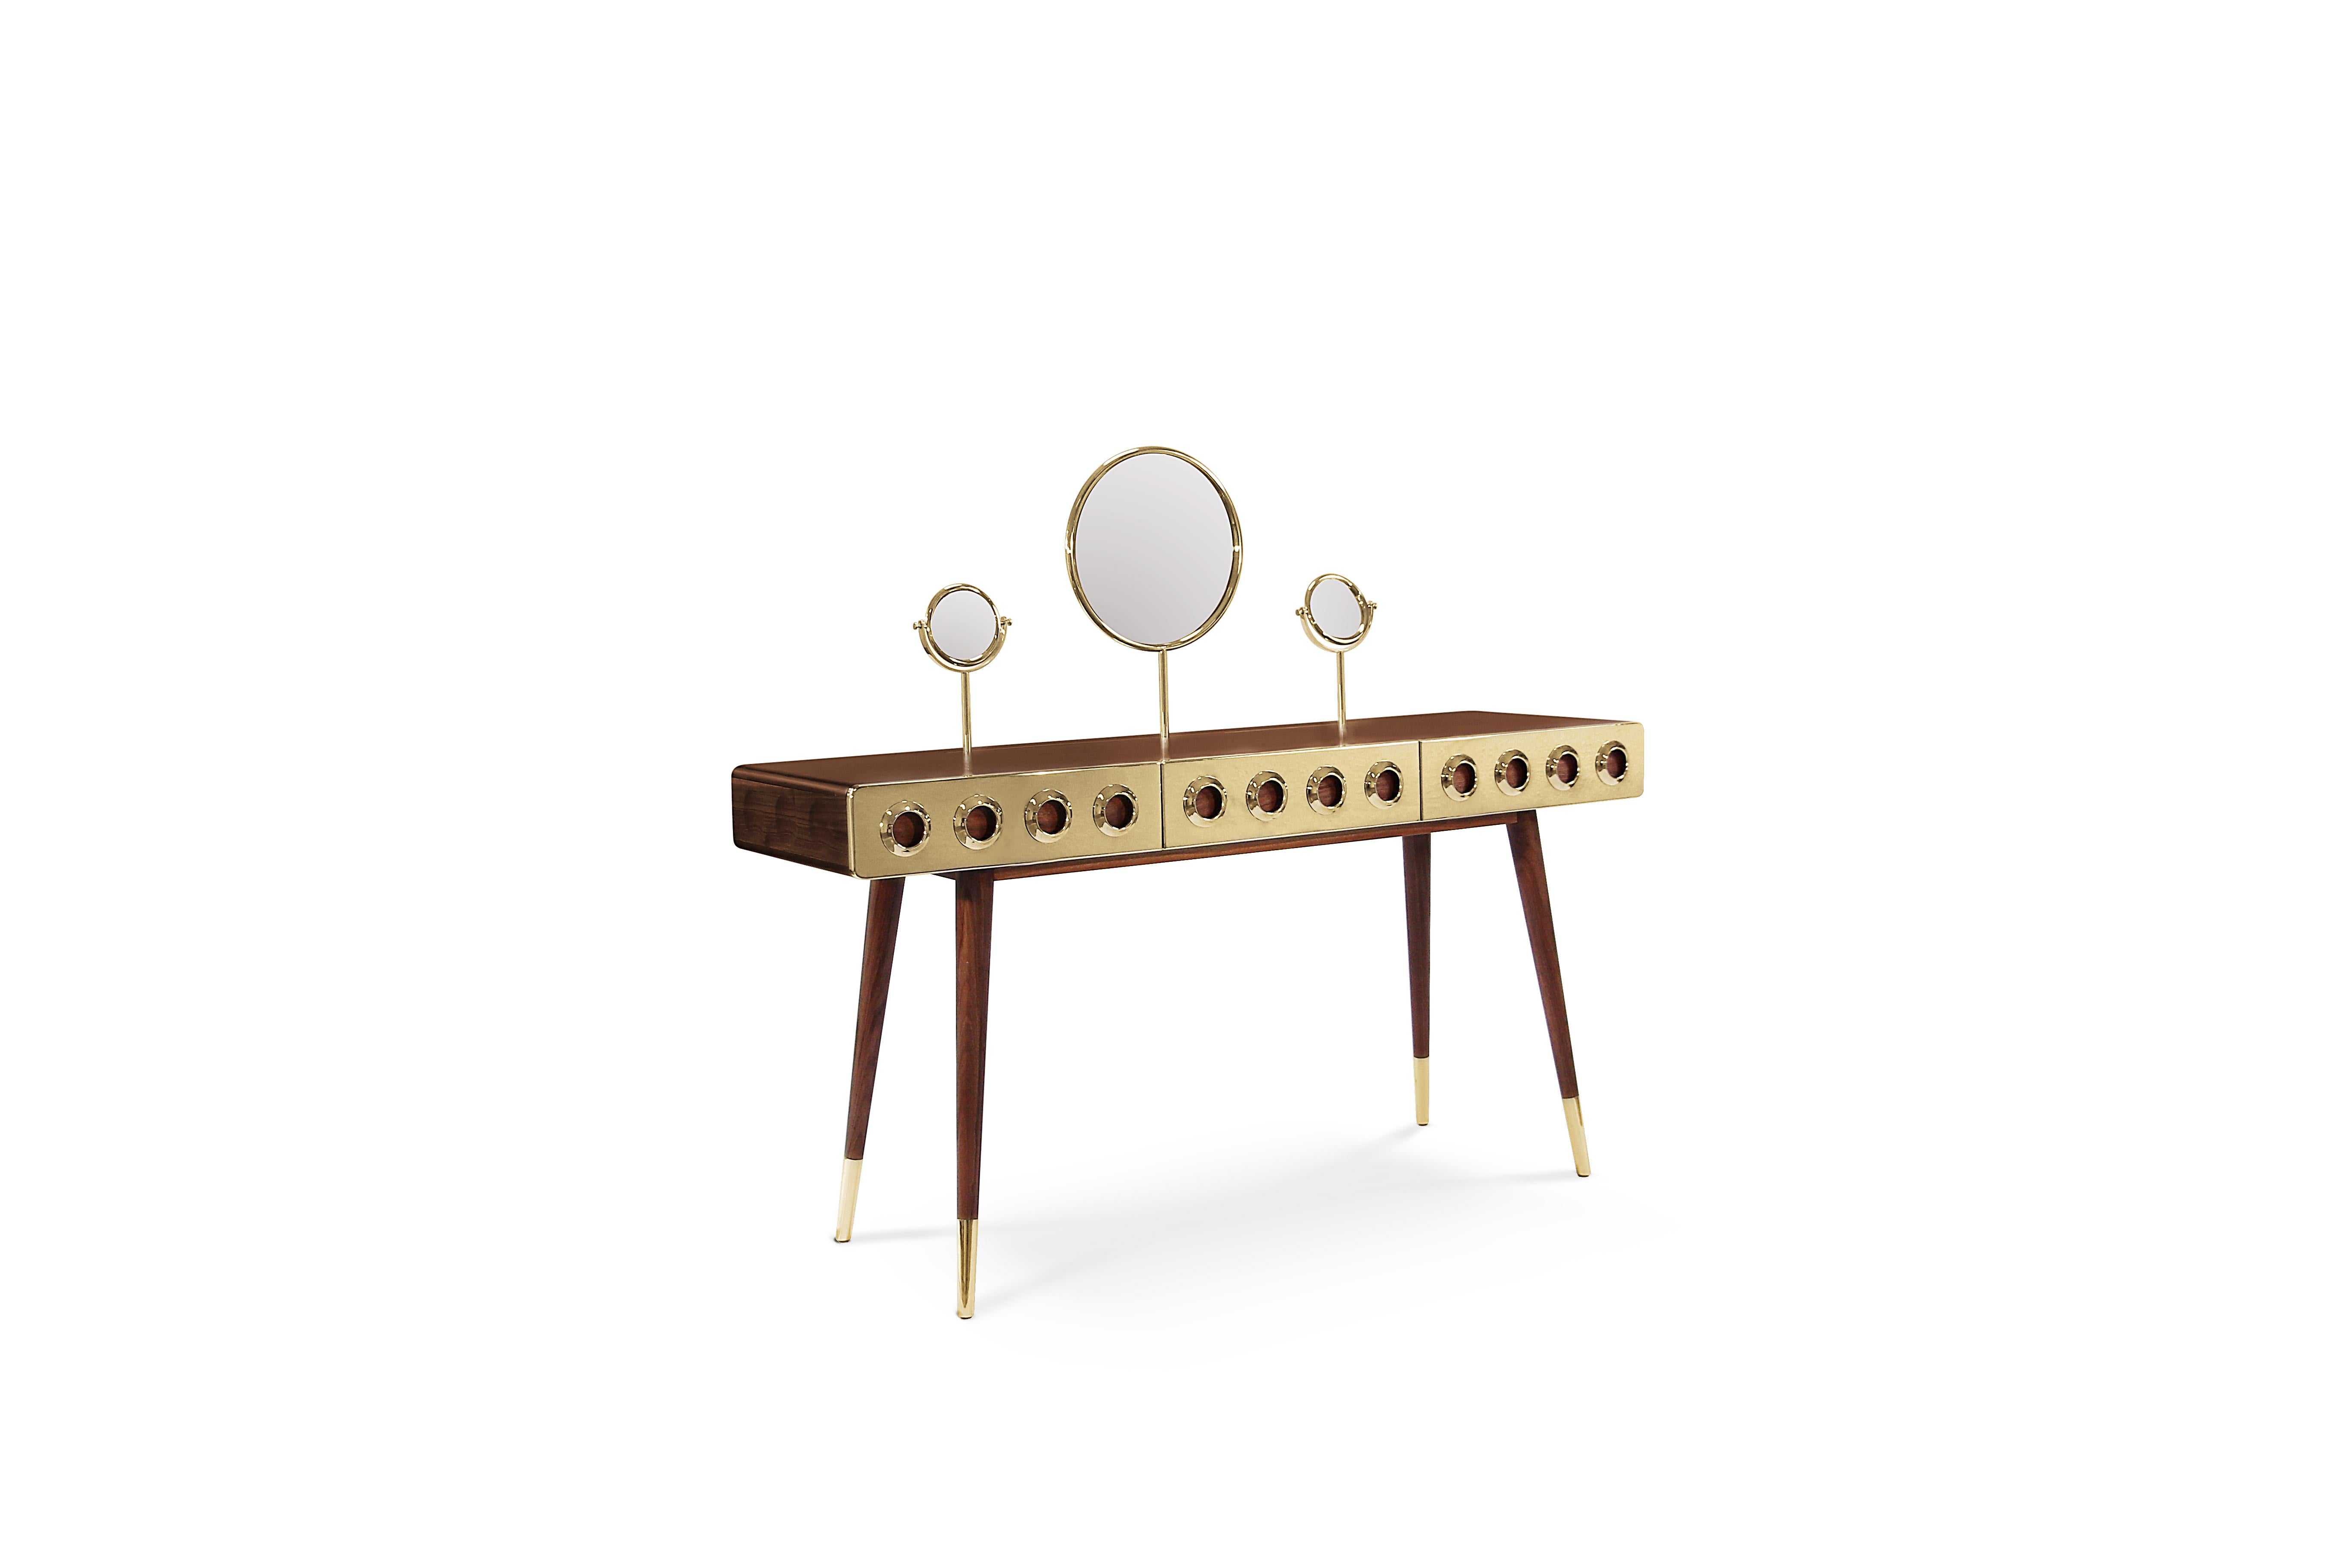 The ultimate dressing table is the ultimate gadget every mid‐century modern sleek interior should have. Golden brass drawers and engraved circles in the solid walnut body are its trademarks, as well as the gold plated feet. A large front mirror fits